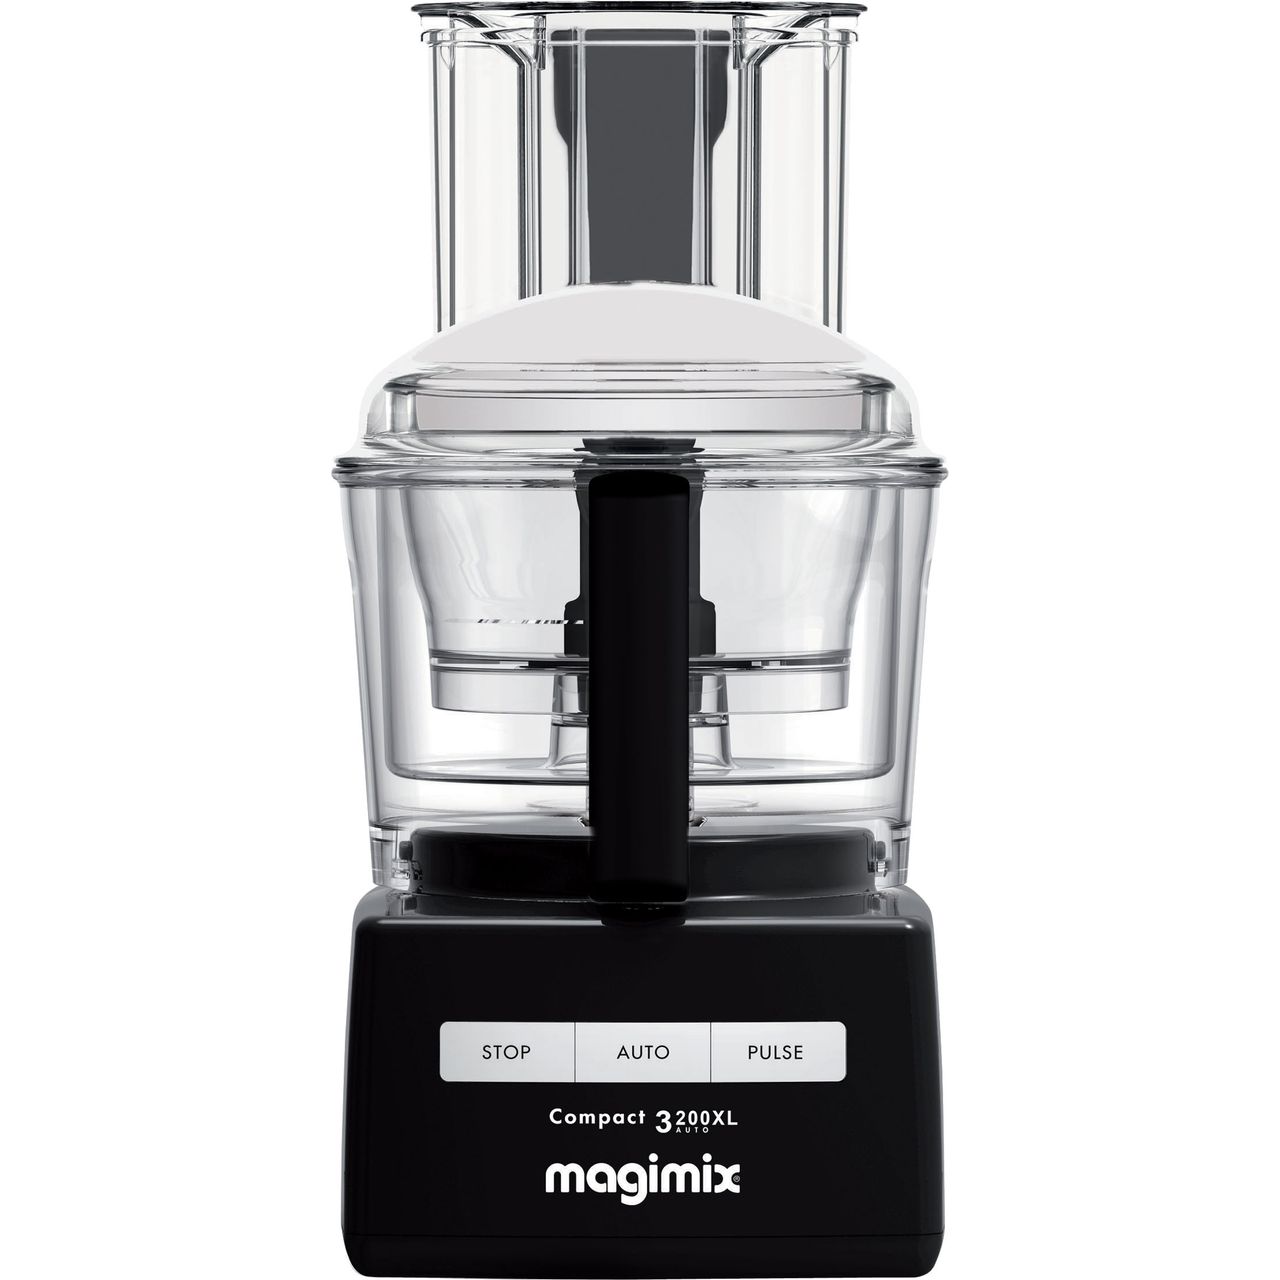 Magimix 3200XL 18363 2.6 Litre Food Processor With 12 Accessories Review